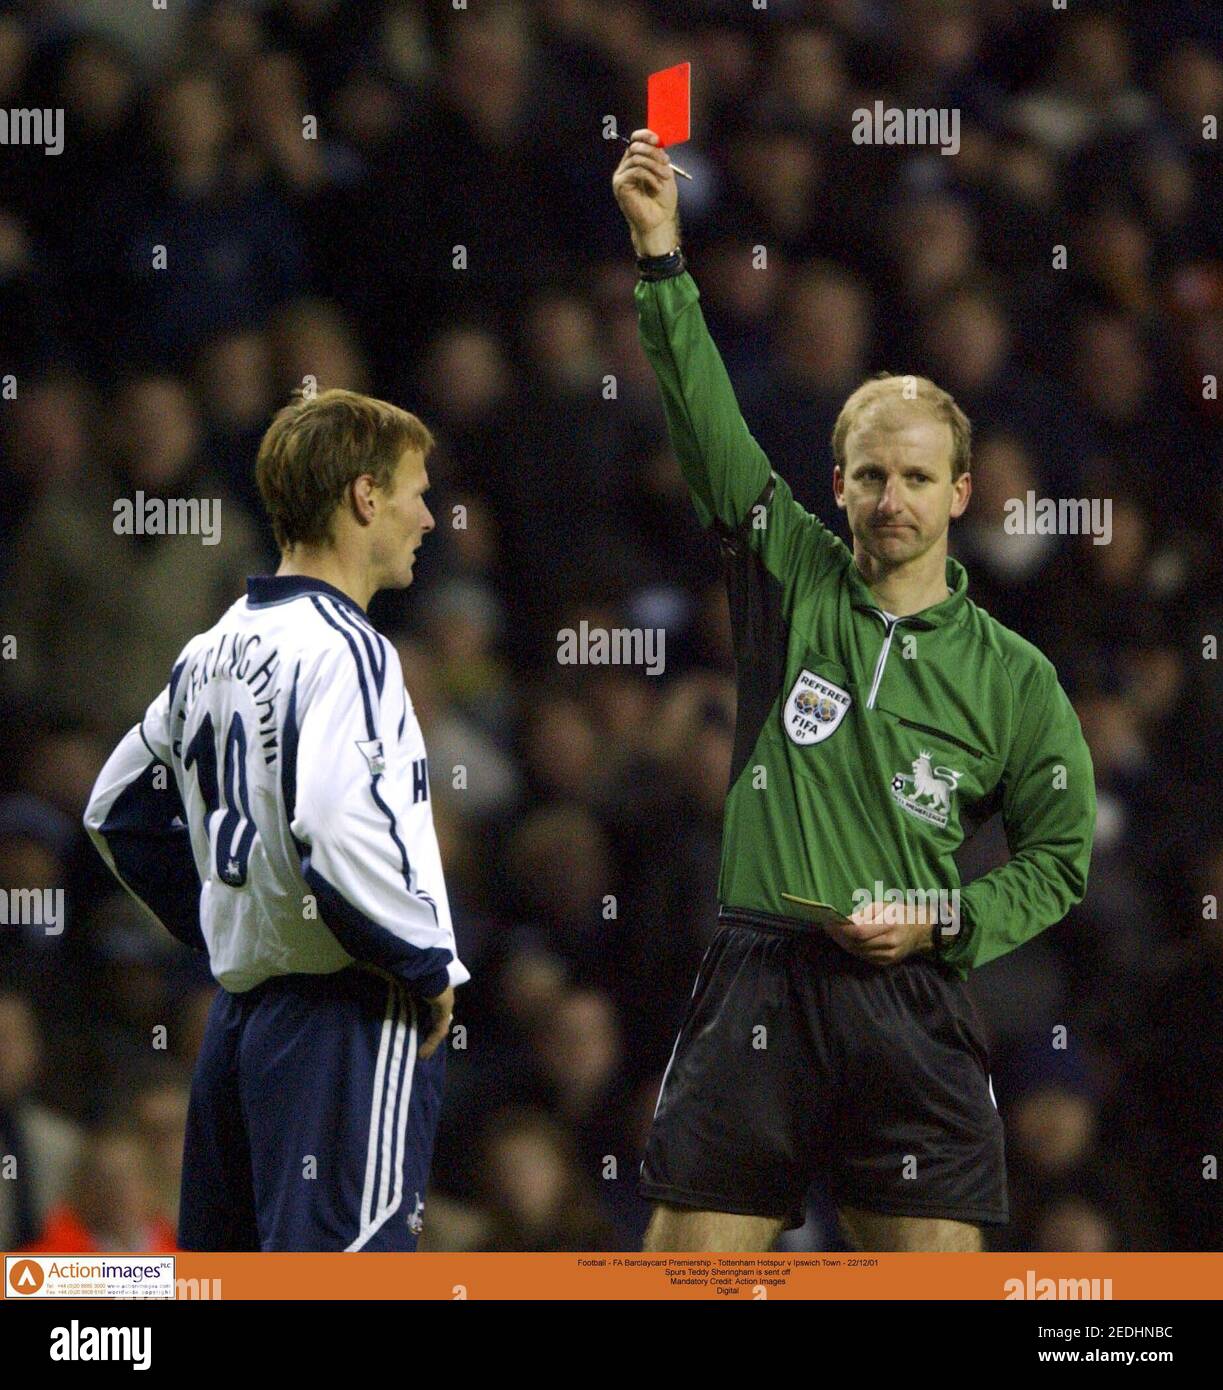 Football - FA Barclaycard Premiership - Tottenham Hotspur v Ipswich Town - 22/12/01  Spurs Teddy Sheringham is sent off by Referee Mike Riley  Mandatory Credit: Action Images  Digital Stock Photo